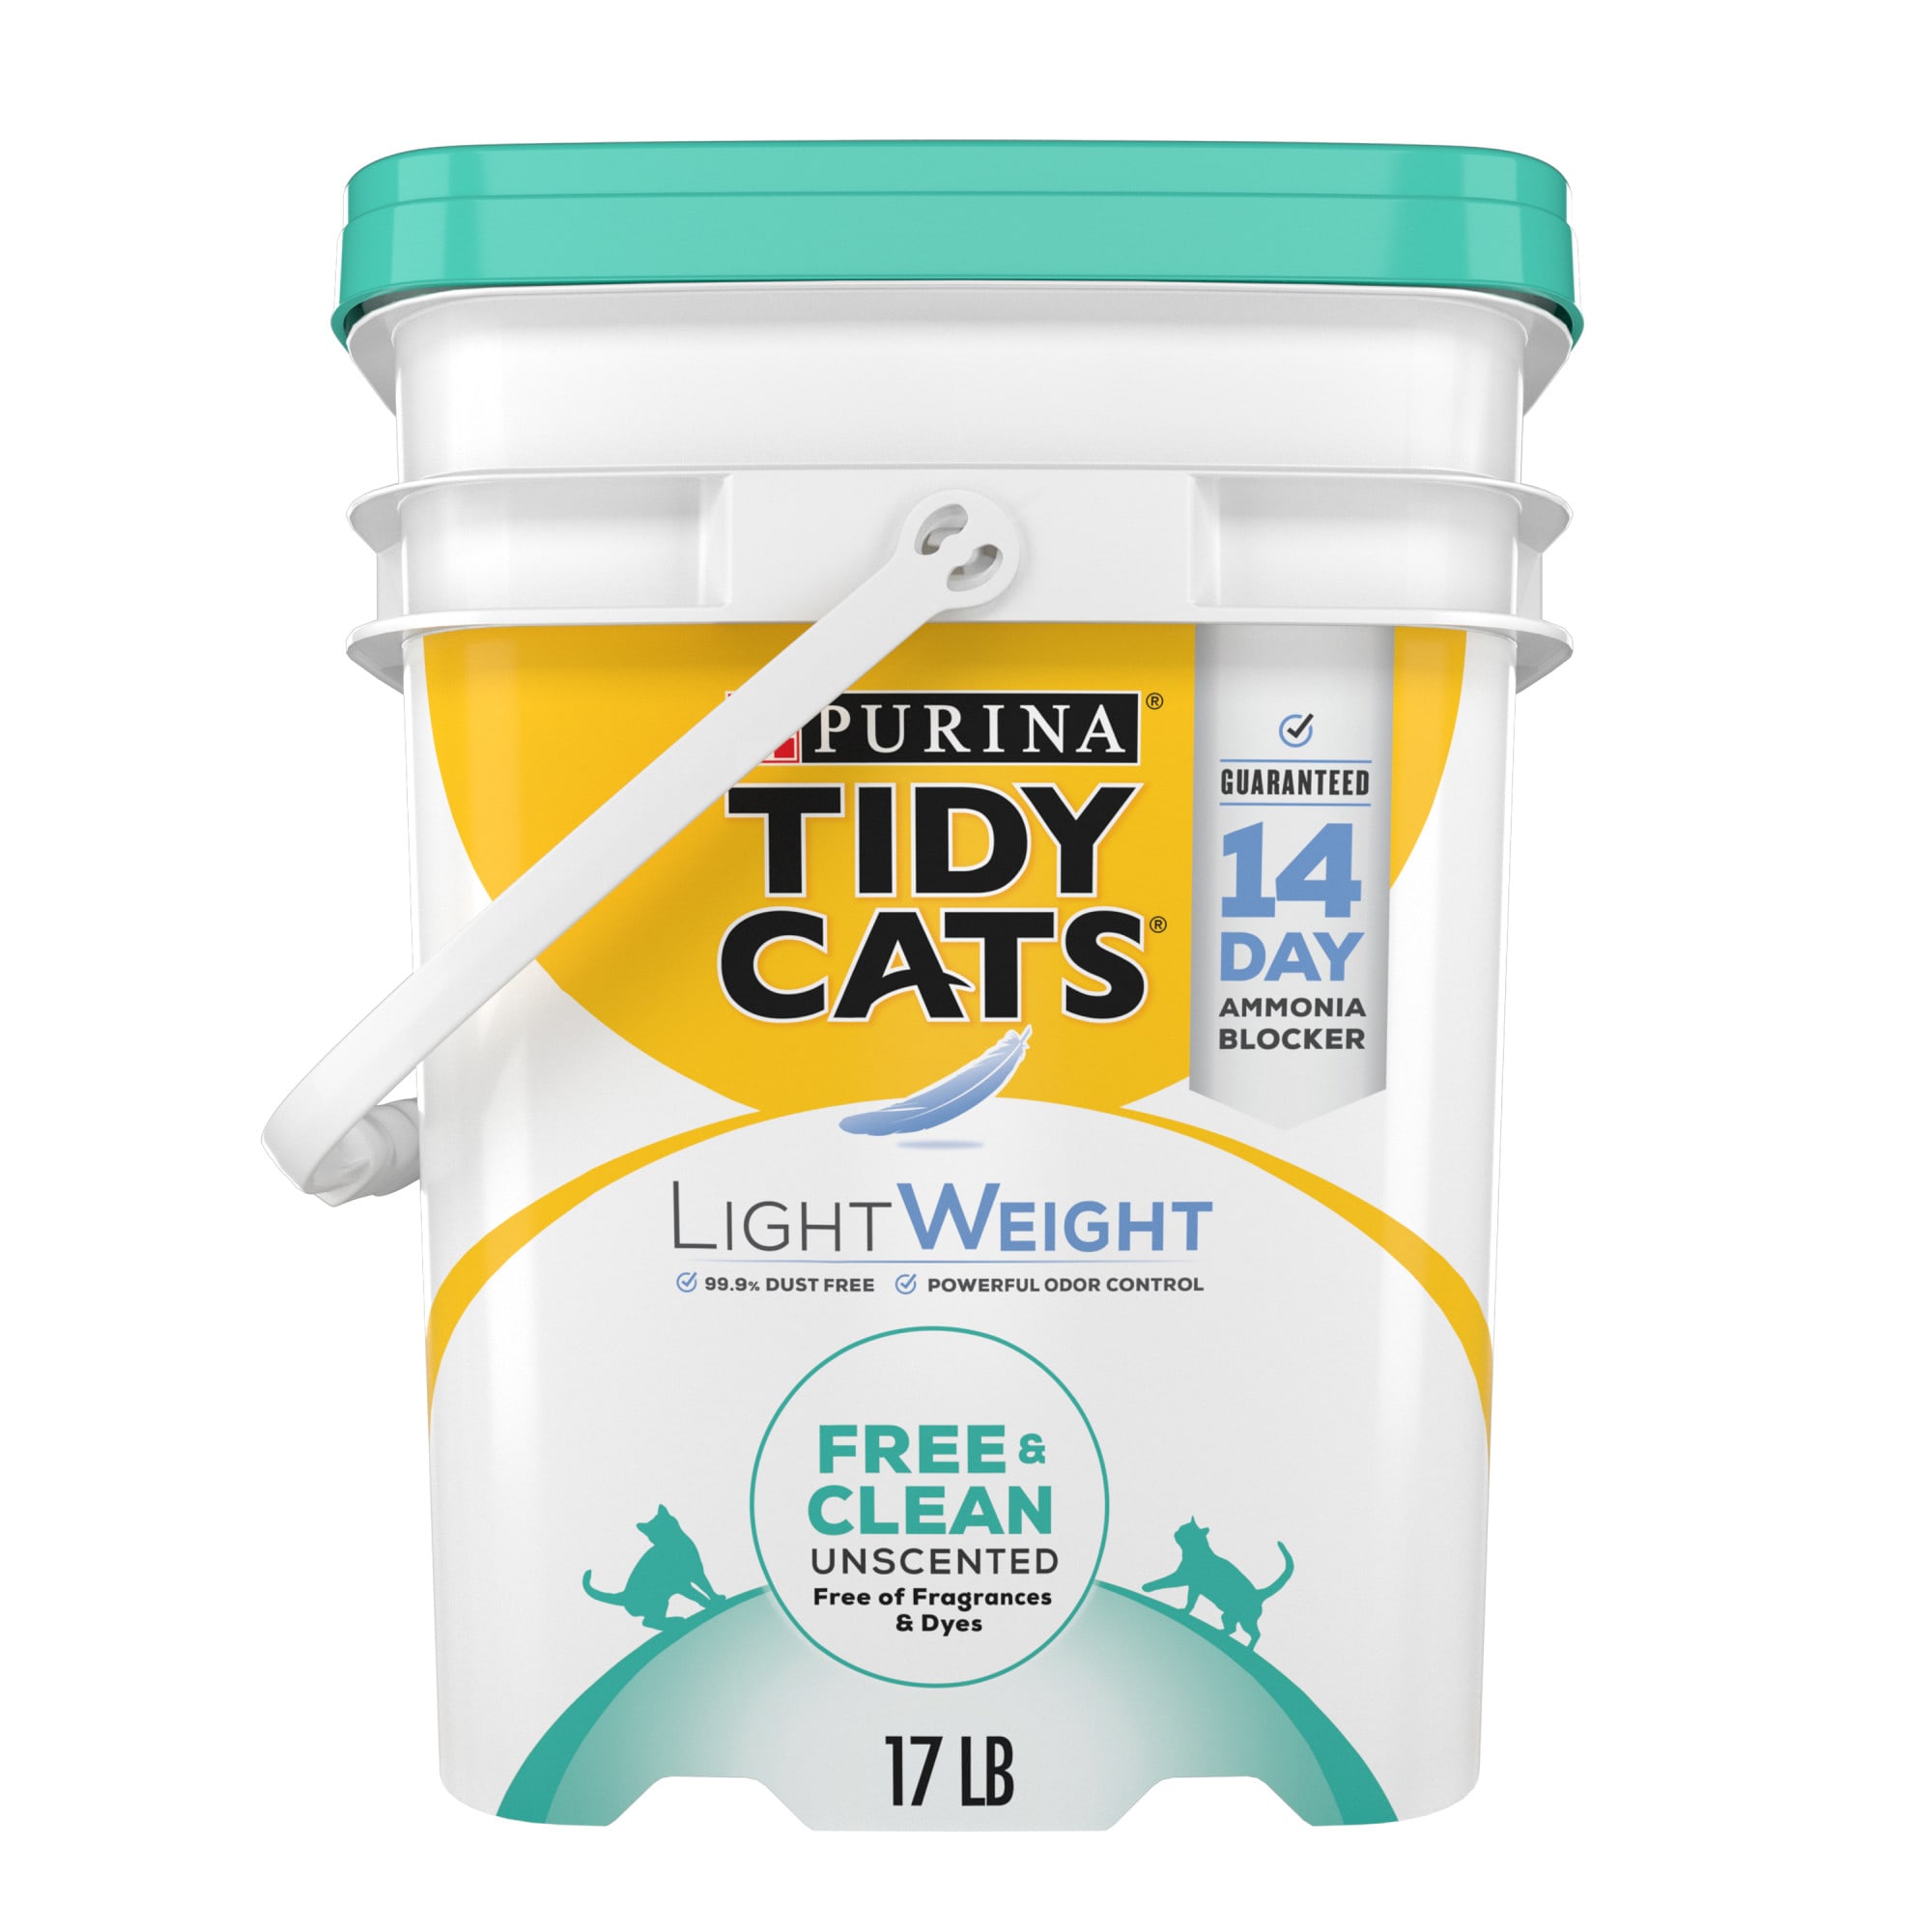 Purina Tidy Cats LightWeight Free & Clean Unscented Dust Free Clumping